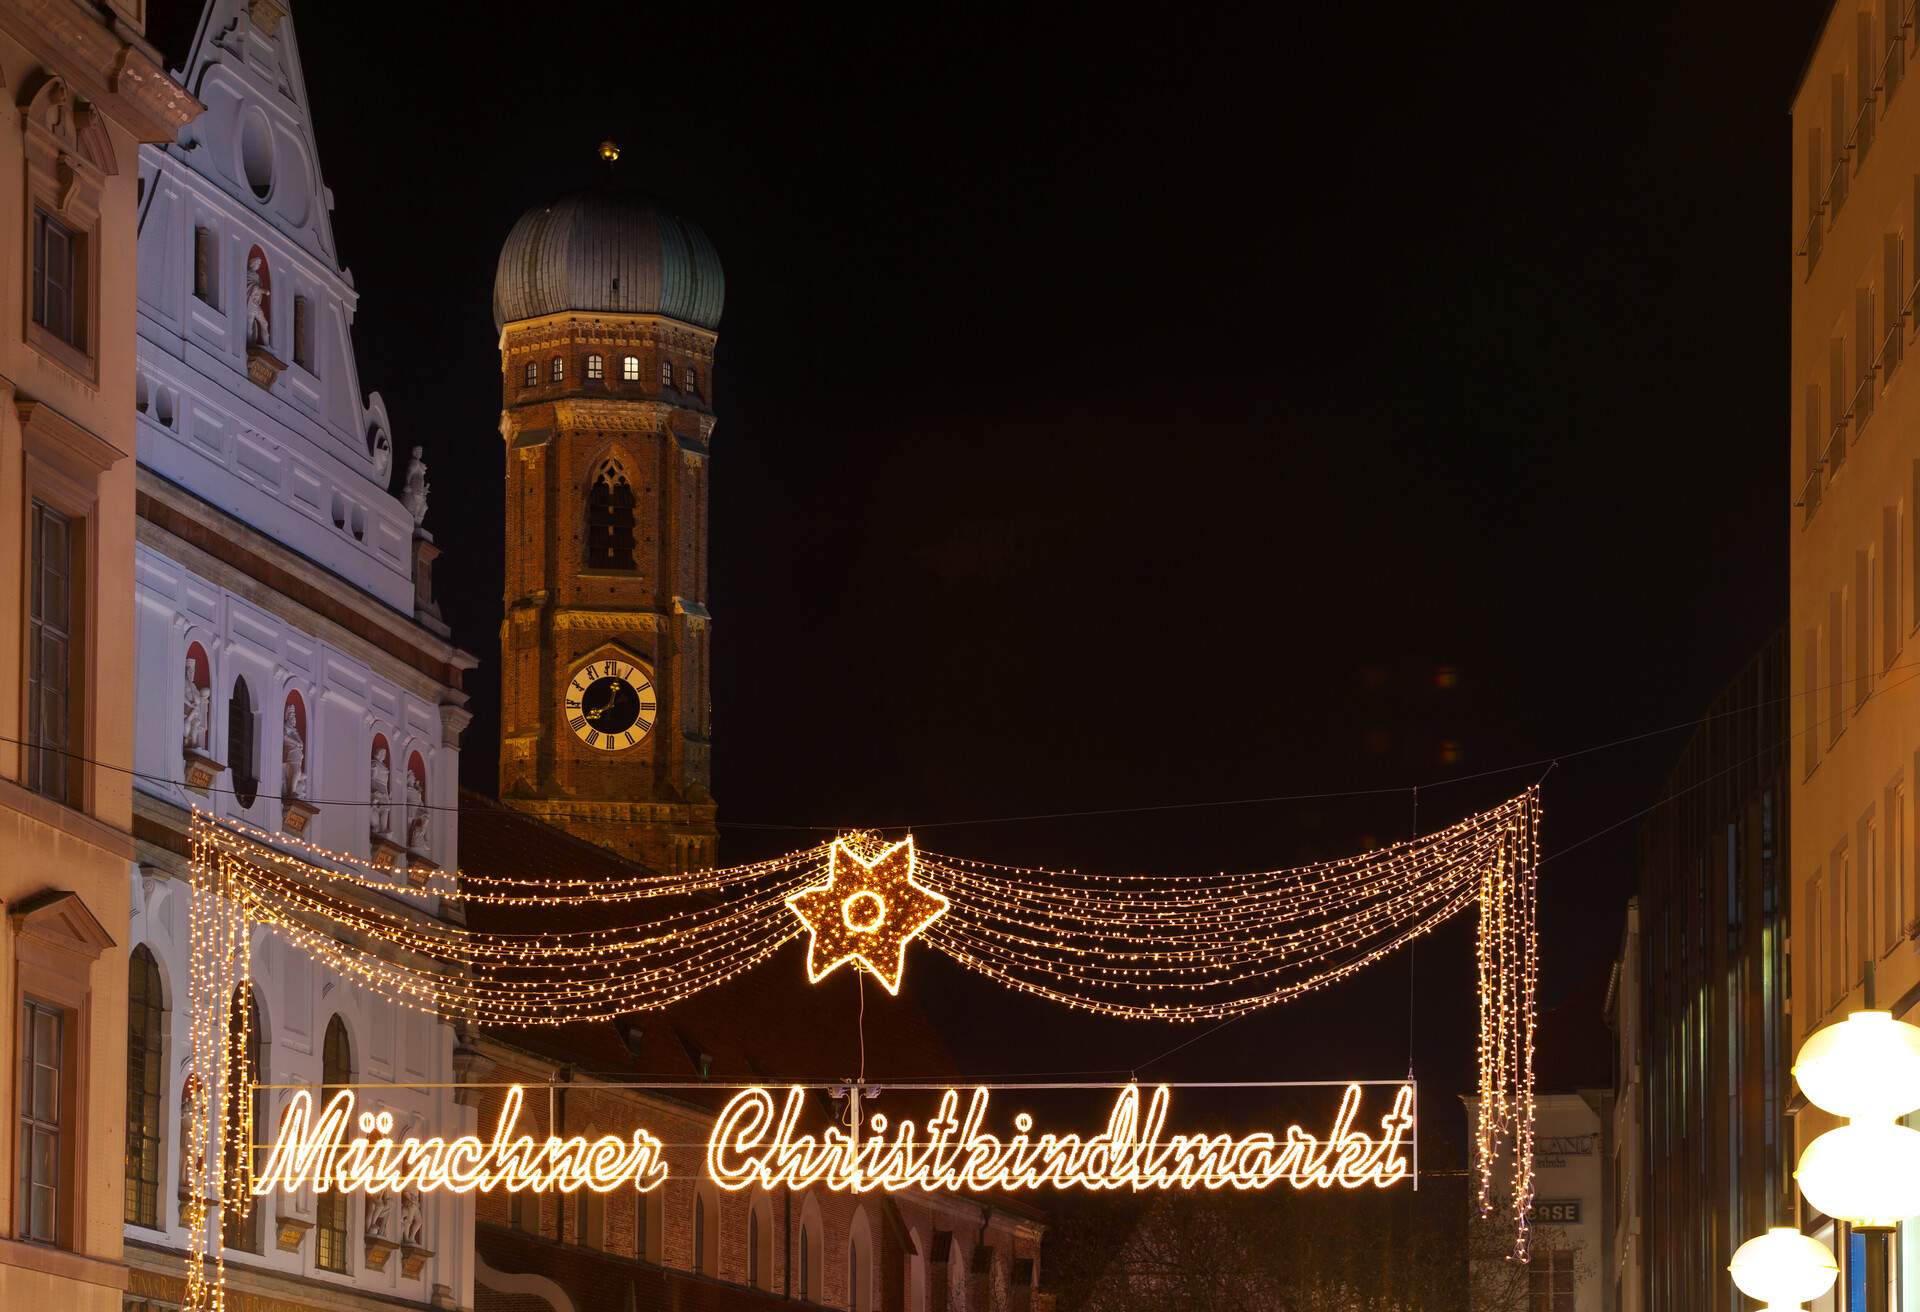 The Munich markets are breathtakingly beautiful with fairy lights lining the streets and illuminated Christmas trees and stars dotted around the marketplace.